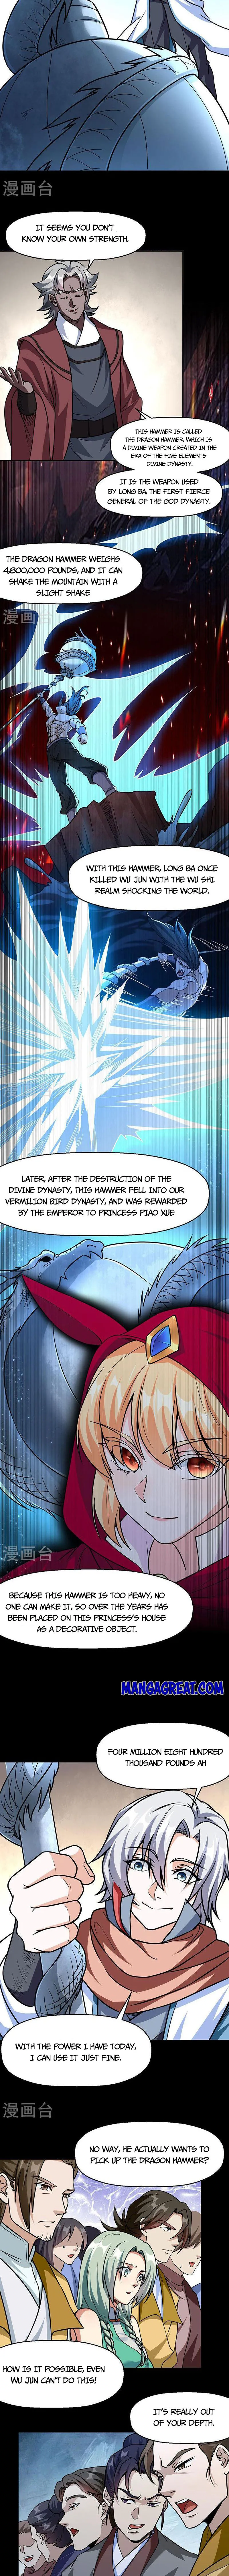 The fight of the fathers - Chapter 36, Page 810 - DBMultiverse